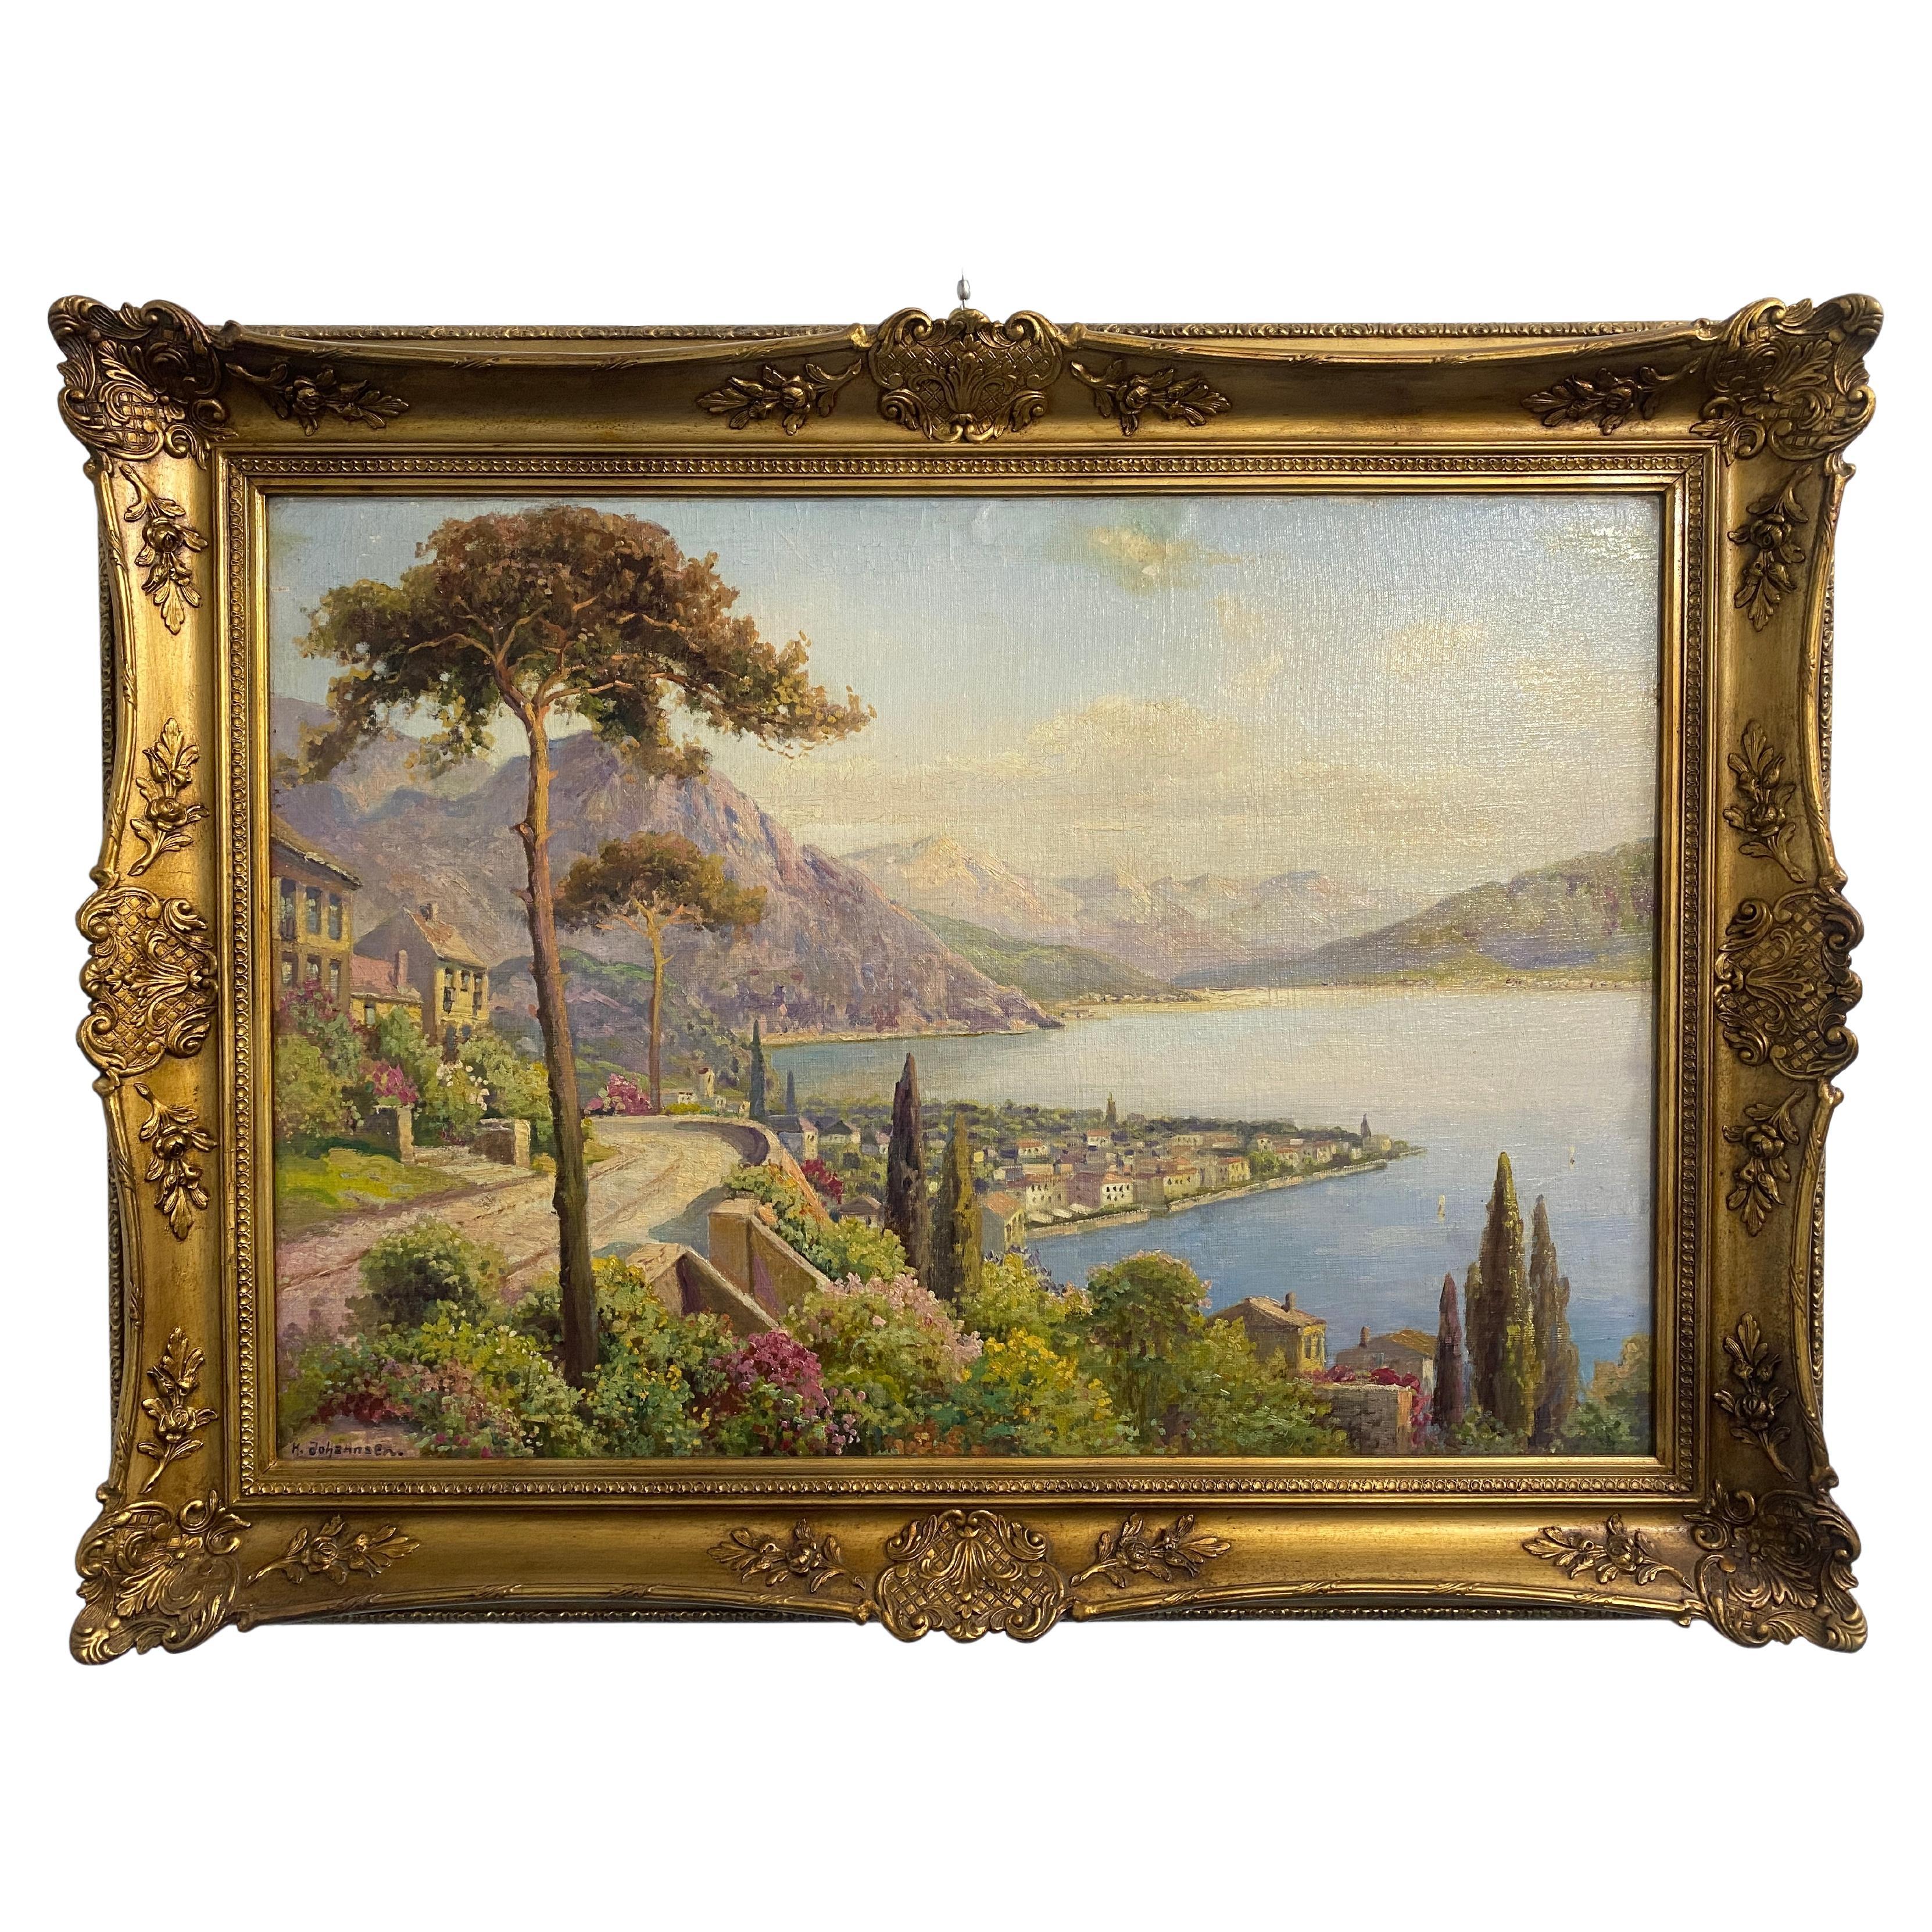 Antique oil painting "Landscape with lake" signed, H Johahnsen For Sale